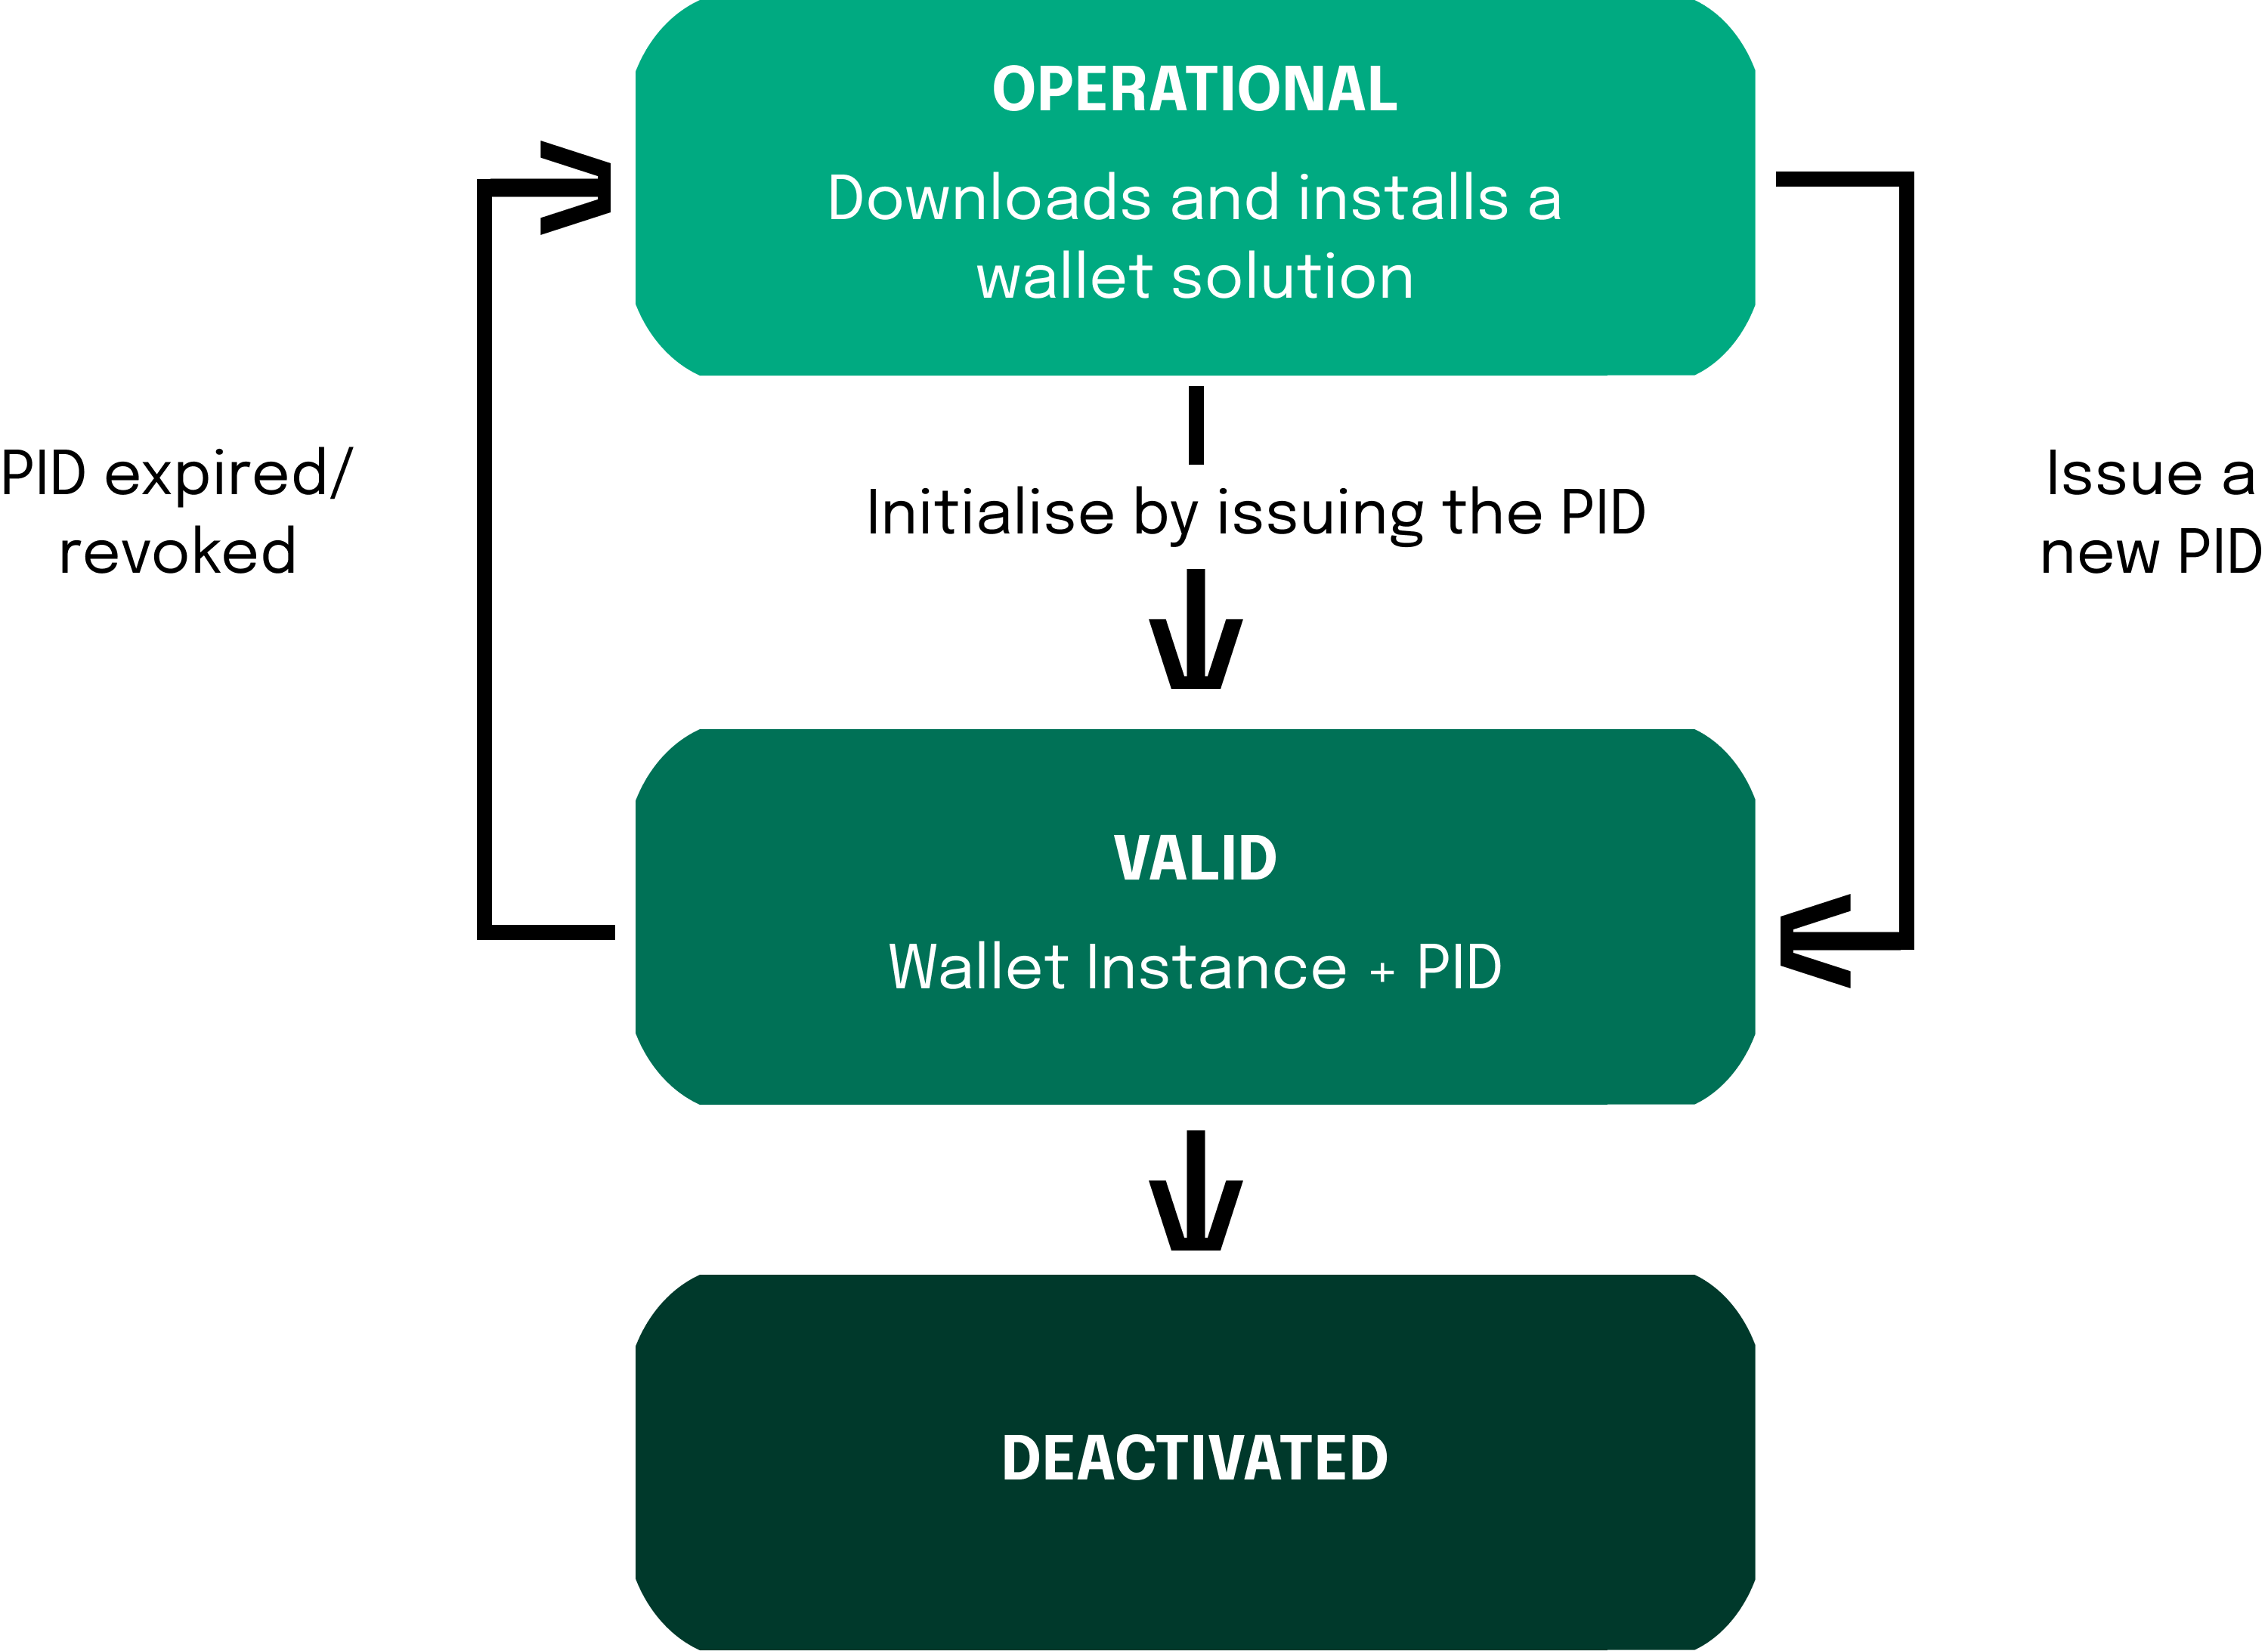 This infographic depicts the lifecycle of an EUDI-Wallet, highlighting three main states: Operational, Valid, and Deactivated. In the 'Operational' state, a wallet solution is downloaded and installed. The process moves to the 'Valid' state when the Wallet Instance is initialized with the issuance of a Personal Identification Data (PID). If the PID expires or is revoked, the wallet reverts to the 'Operational' state until a new PID is issued. If deactivated, the wallet enters the 'Deactivated' state, indicating it's no longer in use.